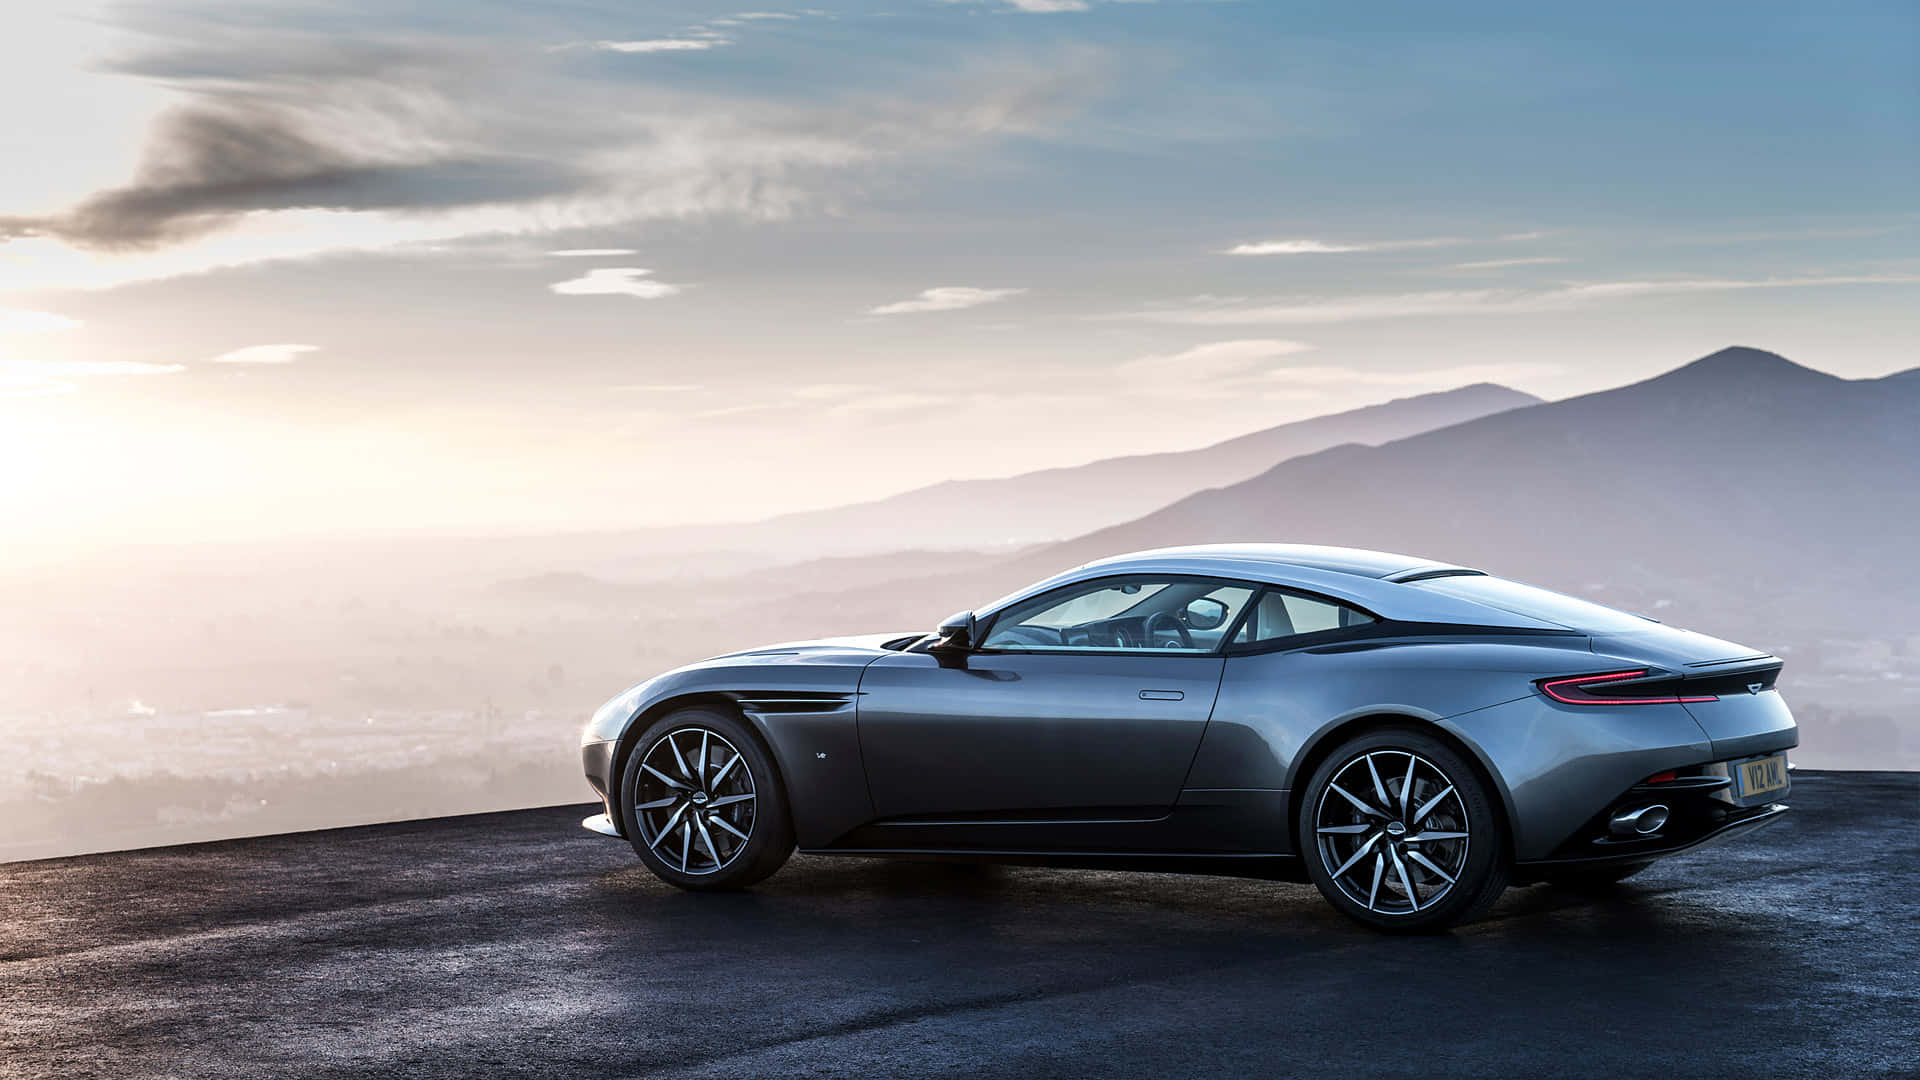 Caption: Aston Martin DB11 - The Epitome of Automotive Excellence Wallpaper